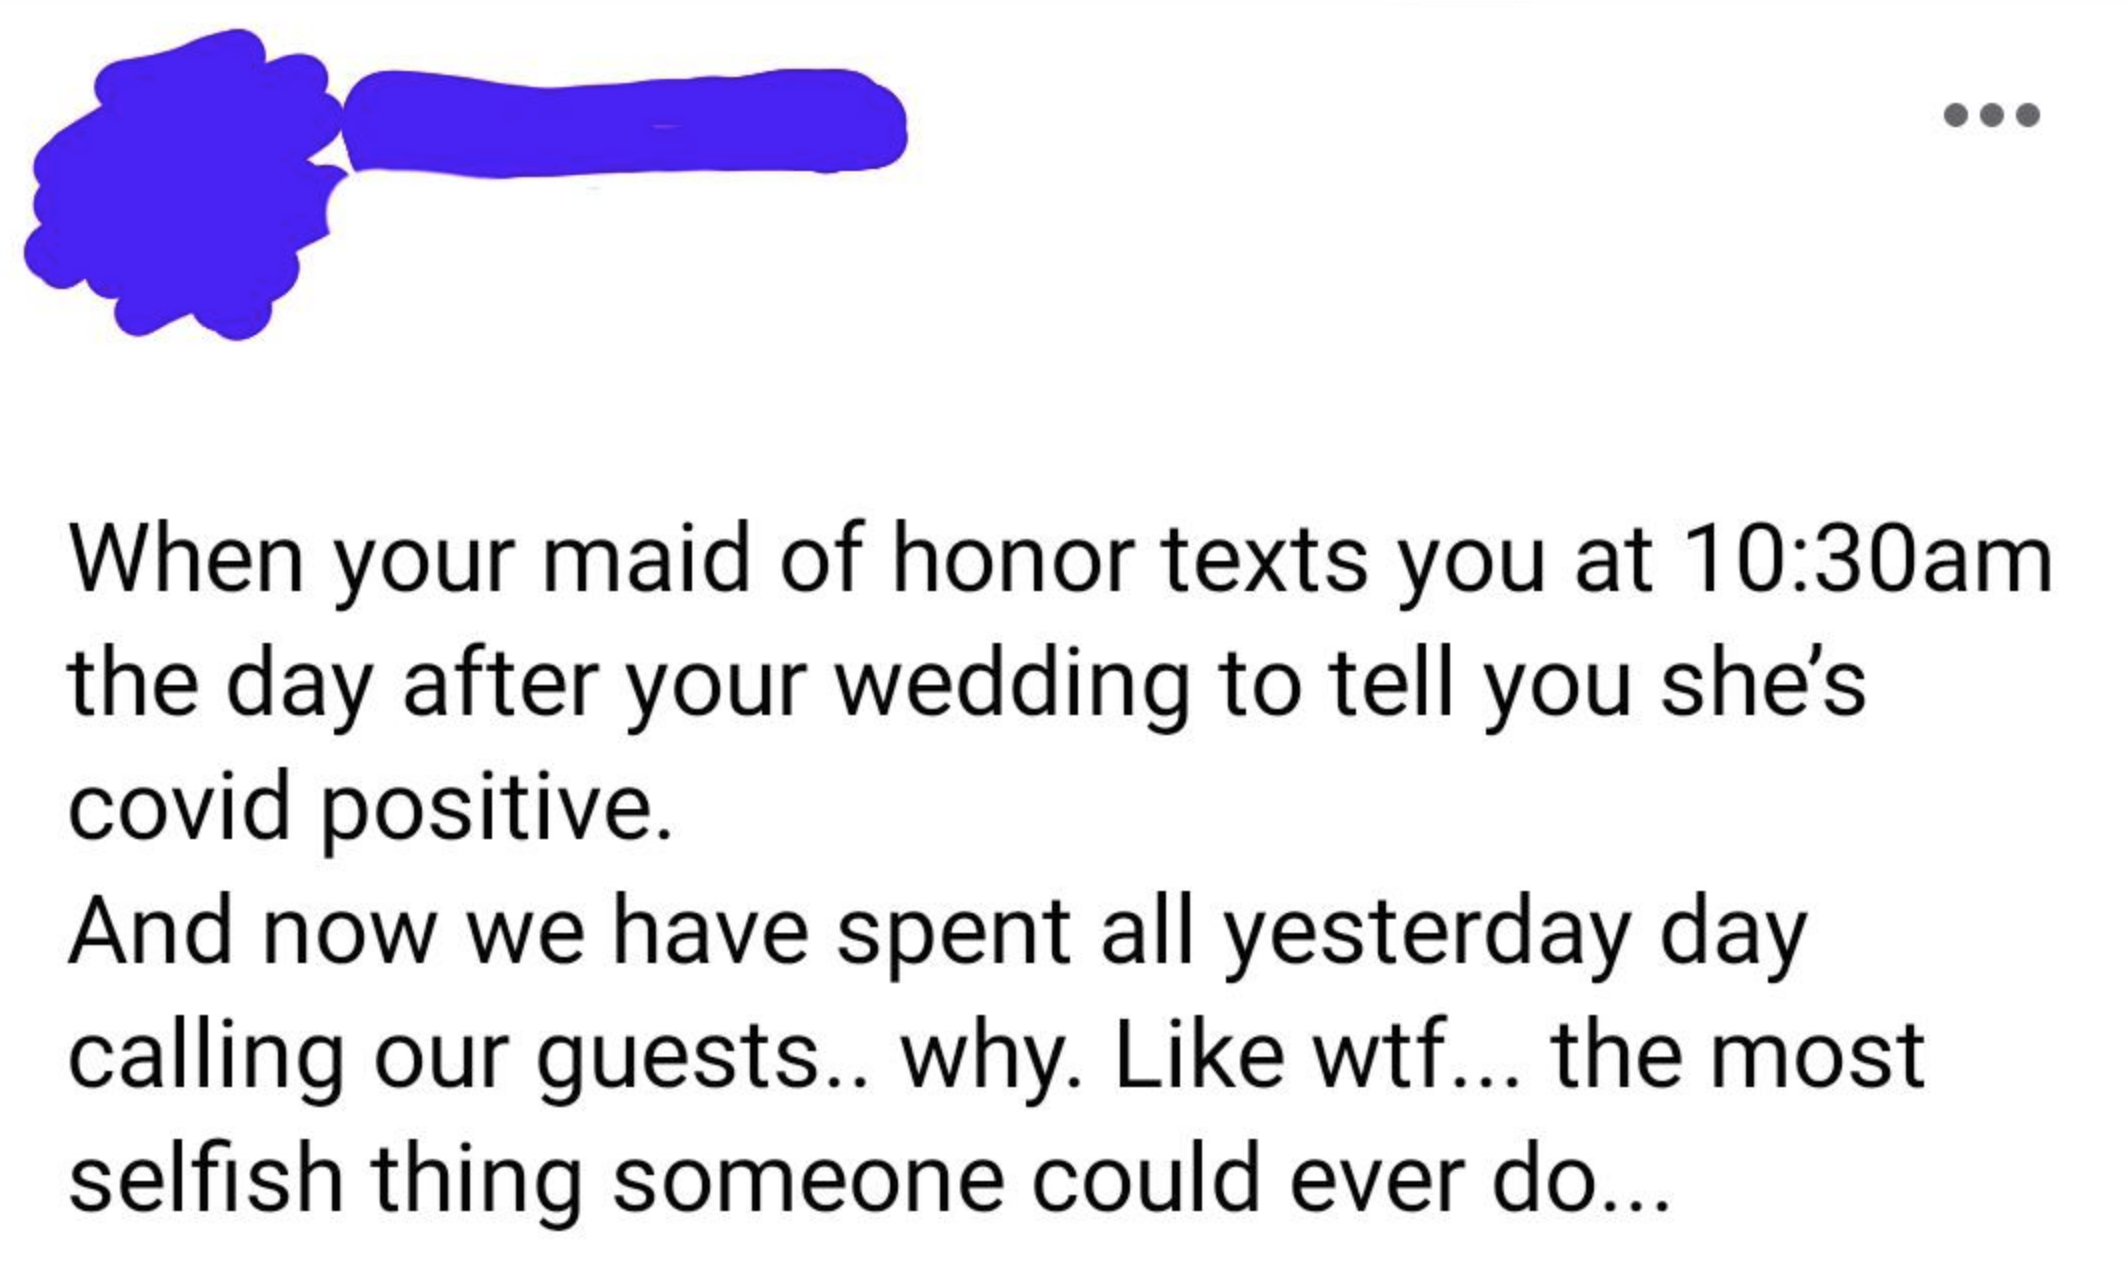 A social media post calls a bridesmaid selfish after she texted the bride the day after the wedding to tell her she has COVID